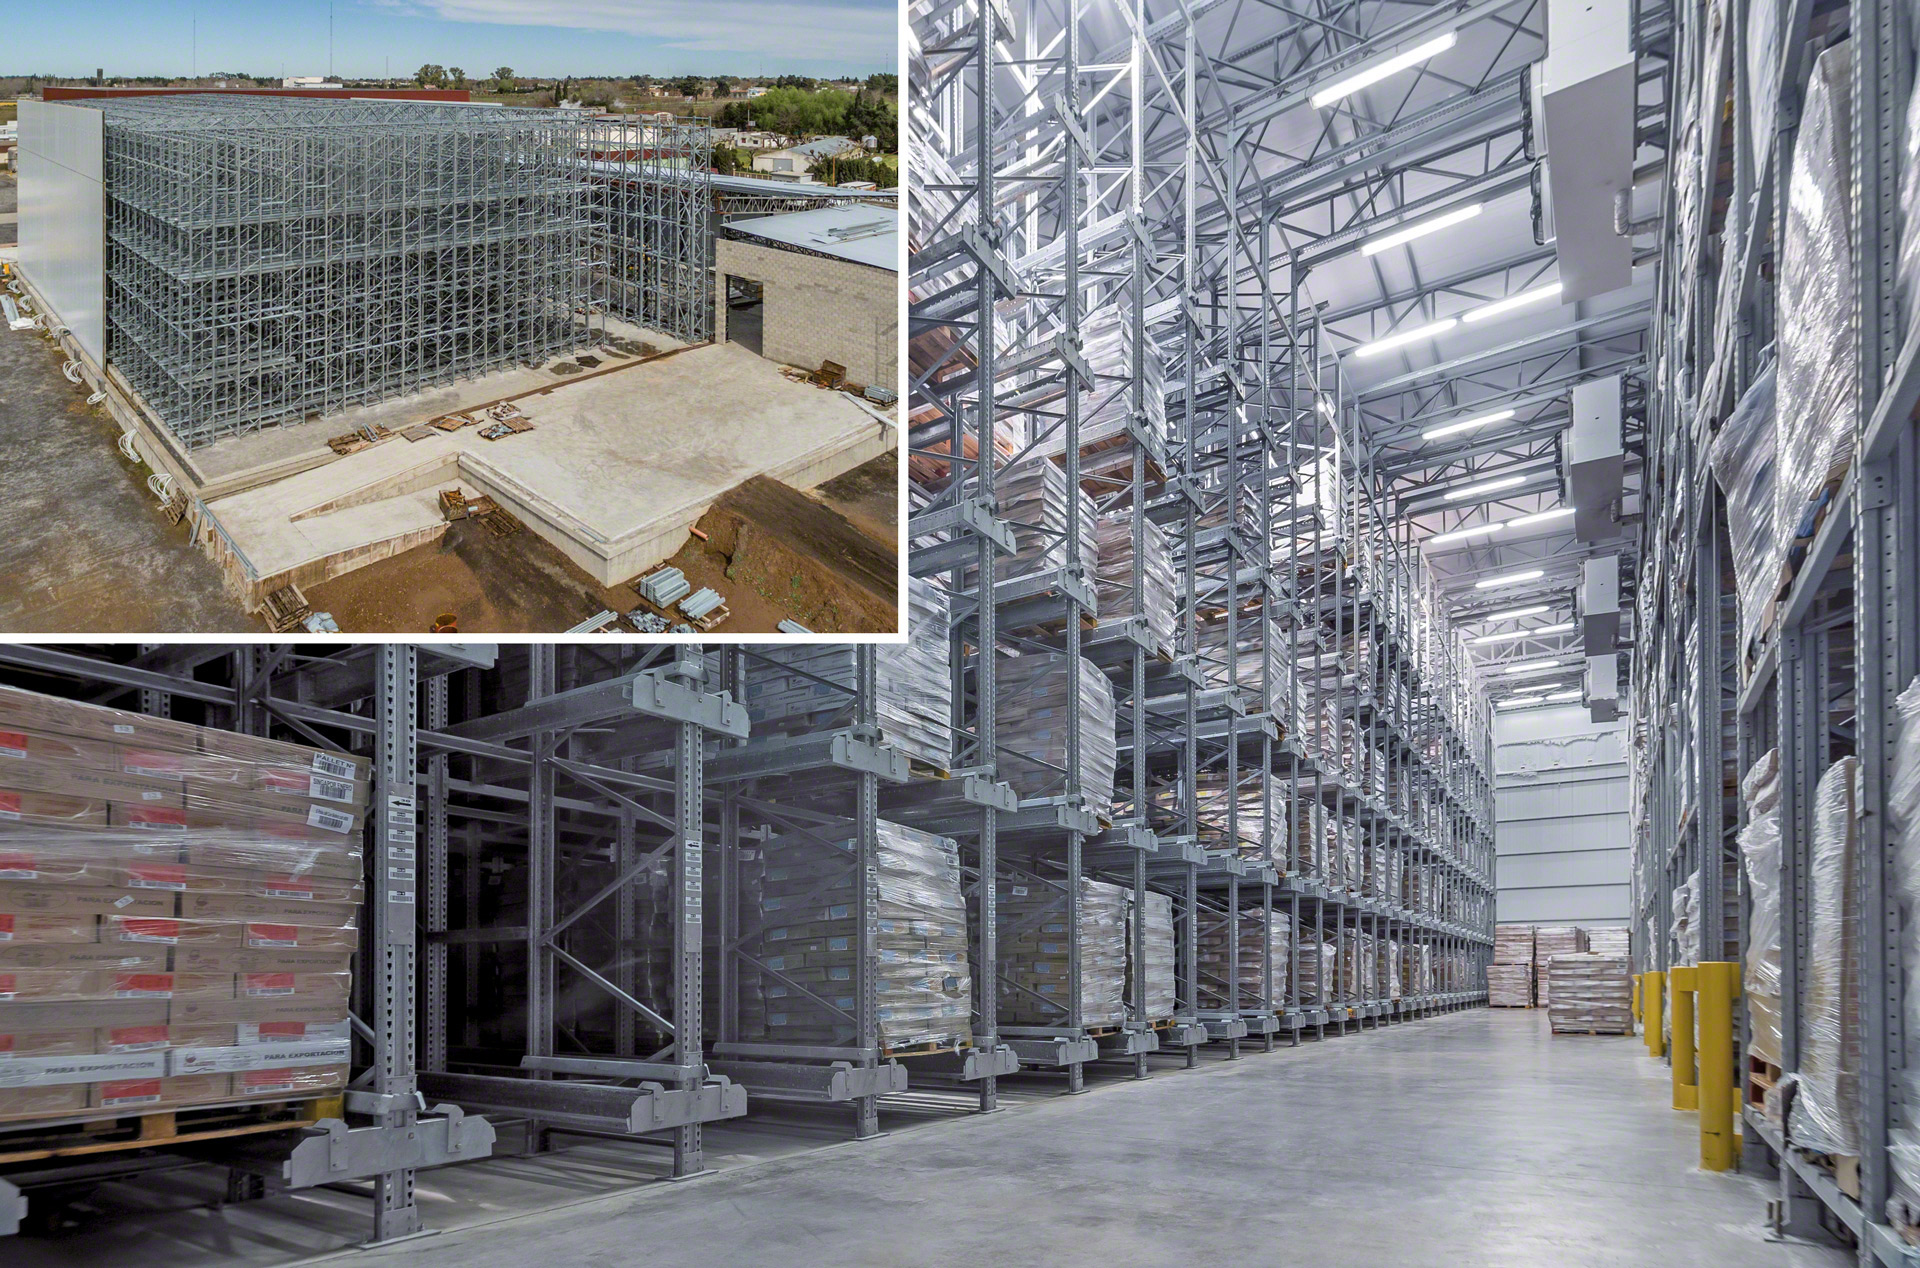 In order to maximize warehouse space in cold storage environments, the Pallet Shuttle can be combined with Rack Supported Buildings